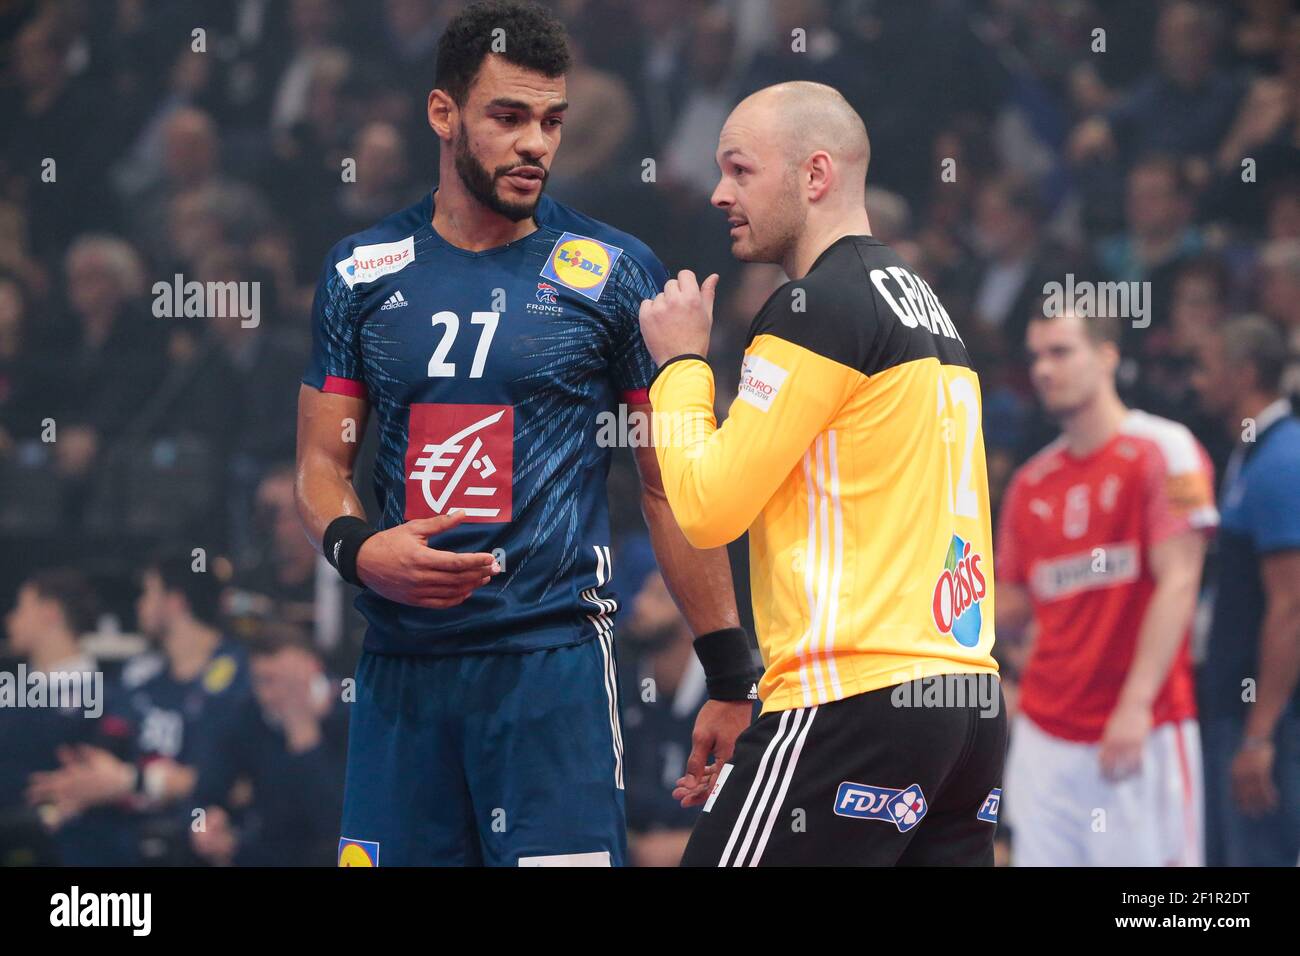 Vincent GERARD (FRA) and Adrien DIPANDA (FRA) during the Golden League Paris 2018 Handball match between France and Denmark on January 7, 2018 at AccorHotels Arena in Paris, France - Photo Stephane Allaman / DPPI Stock Photo